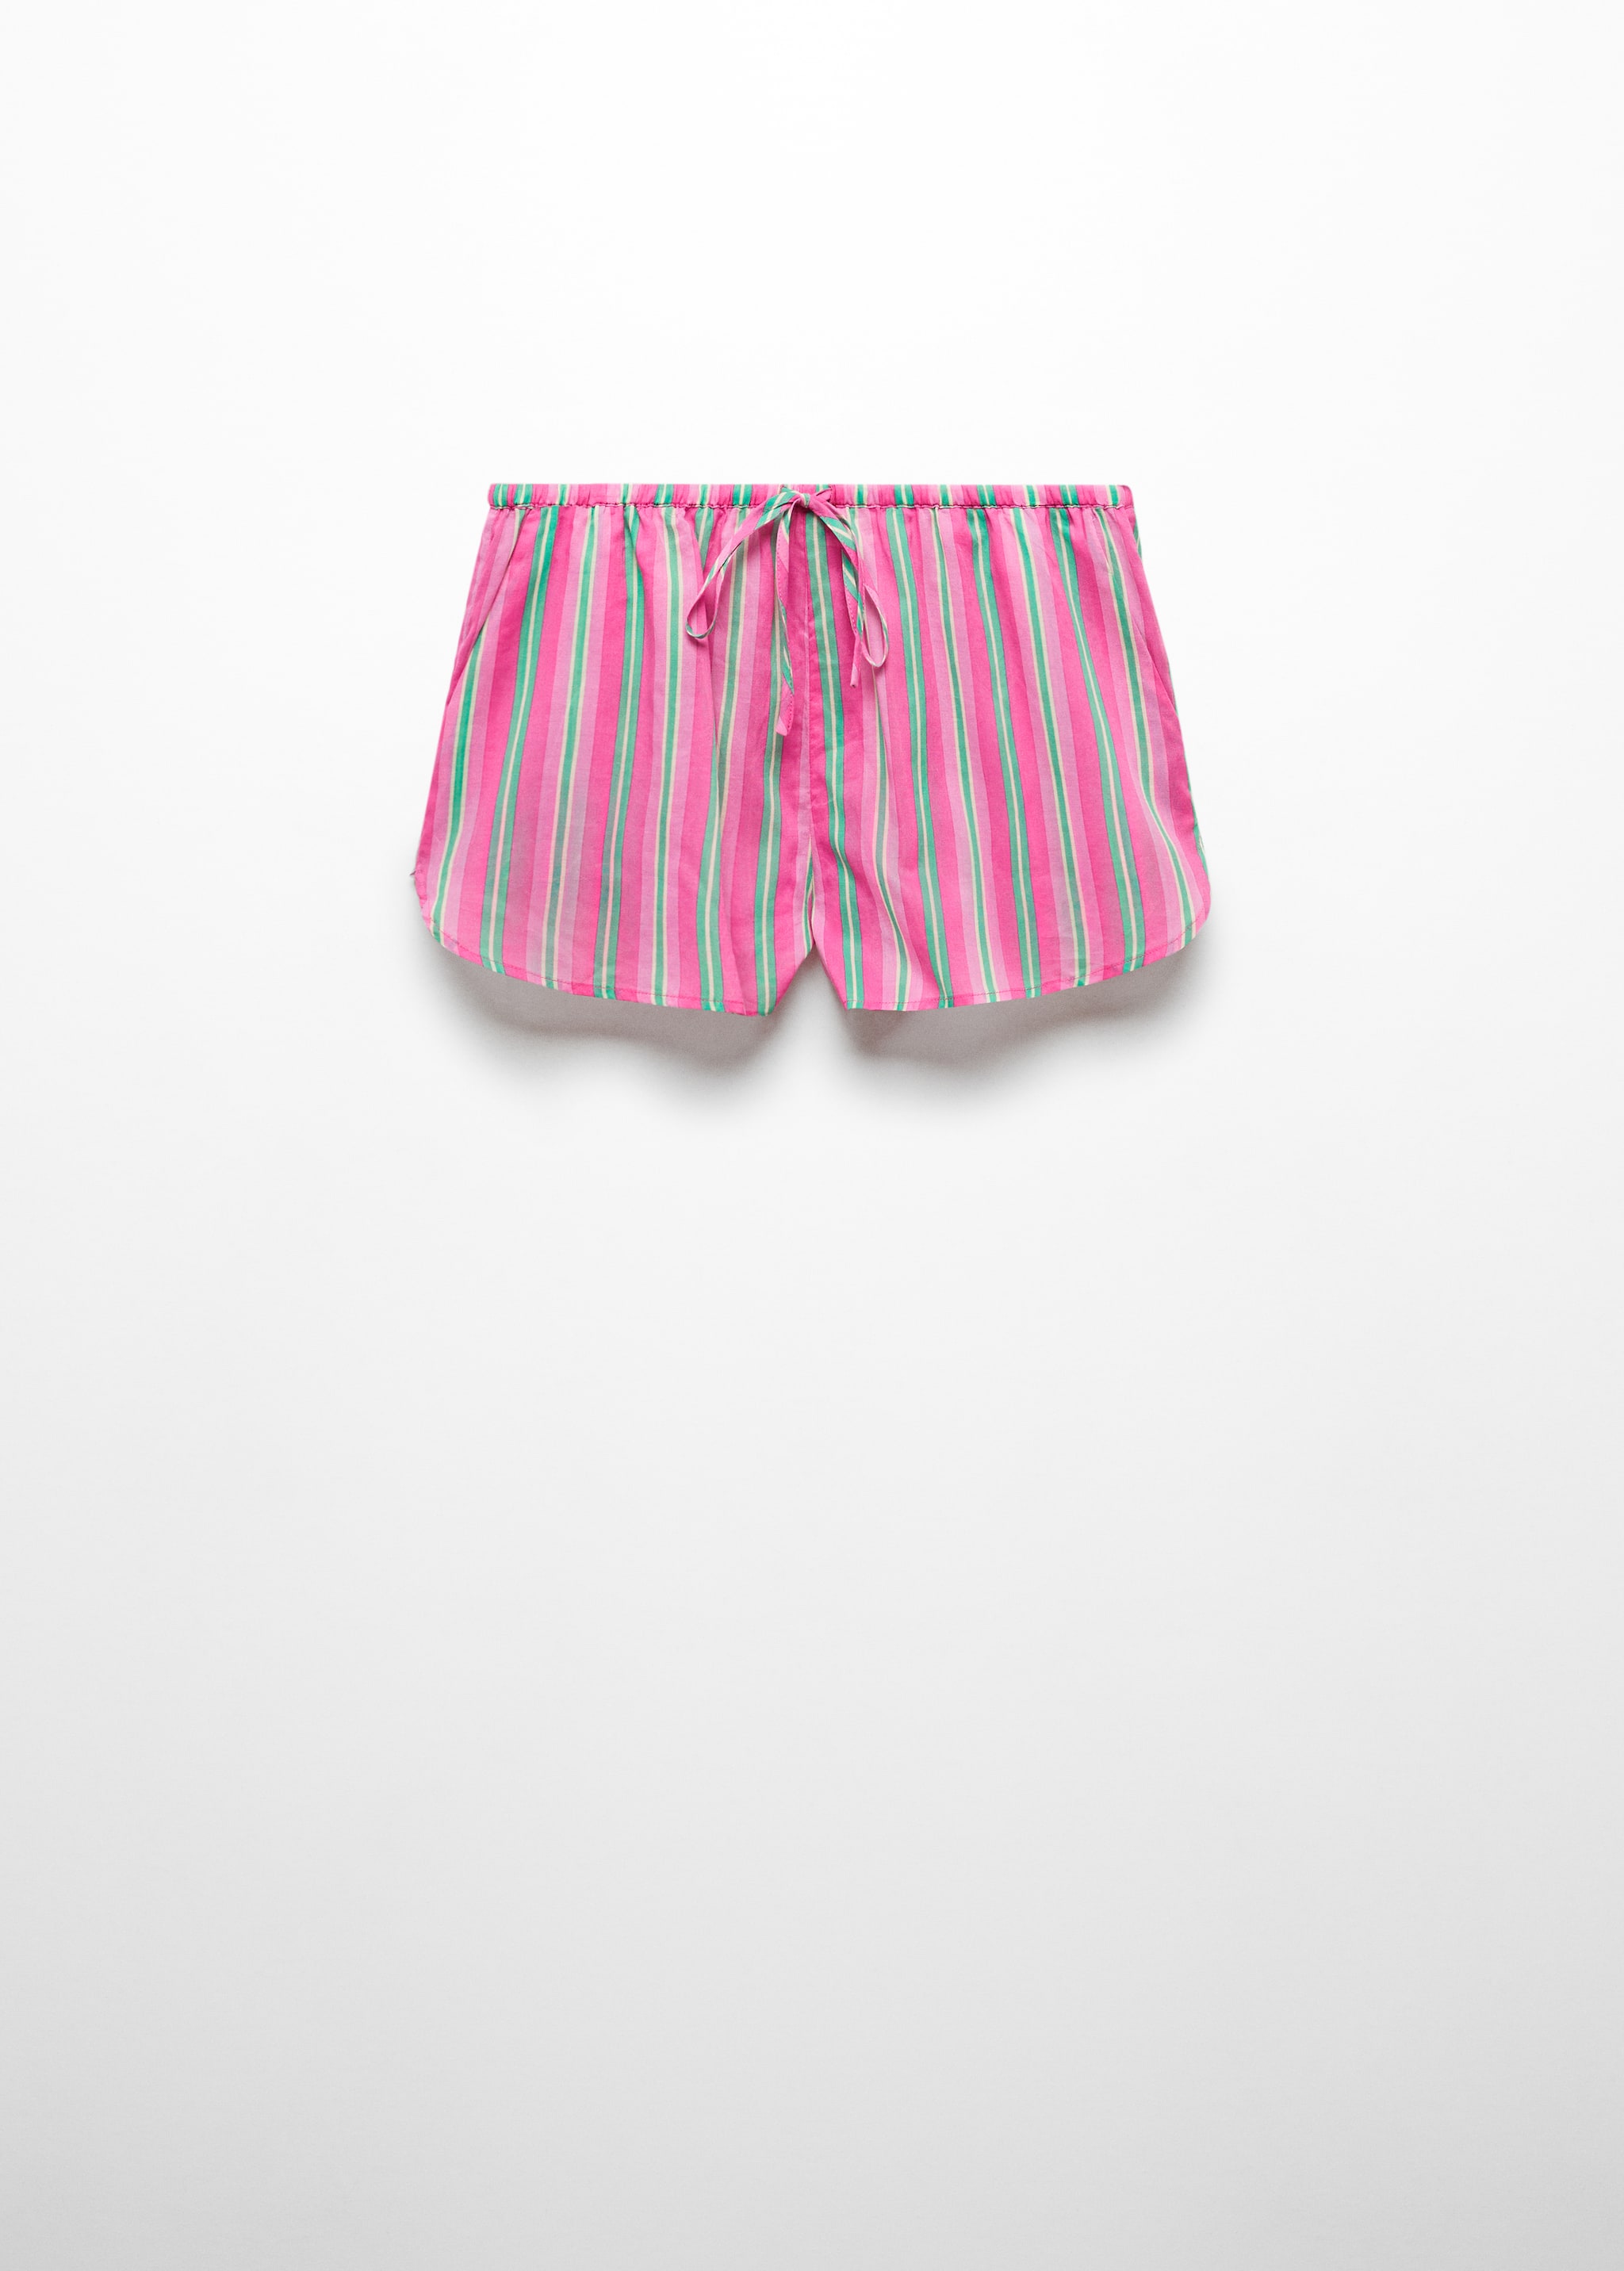 Striped printed shorts - Article without model